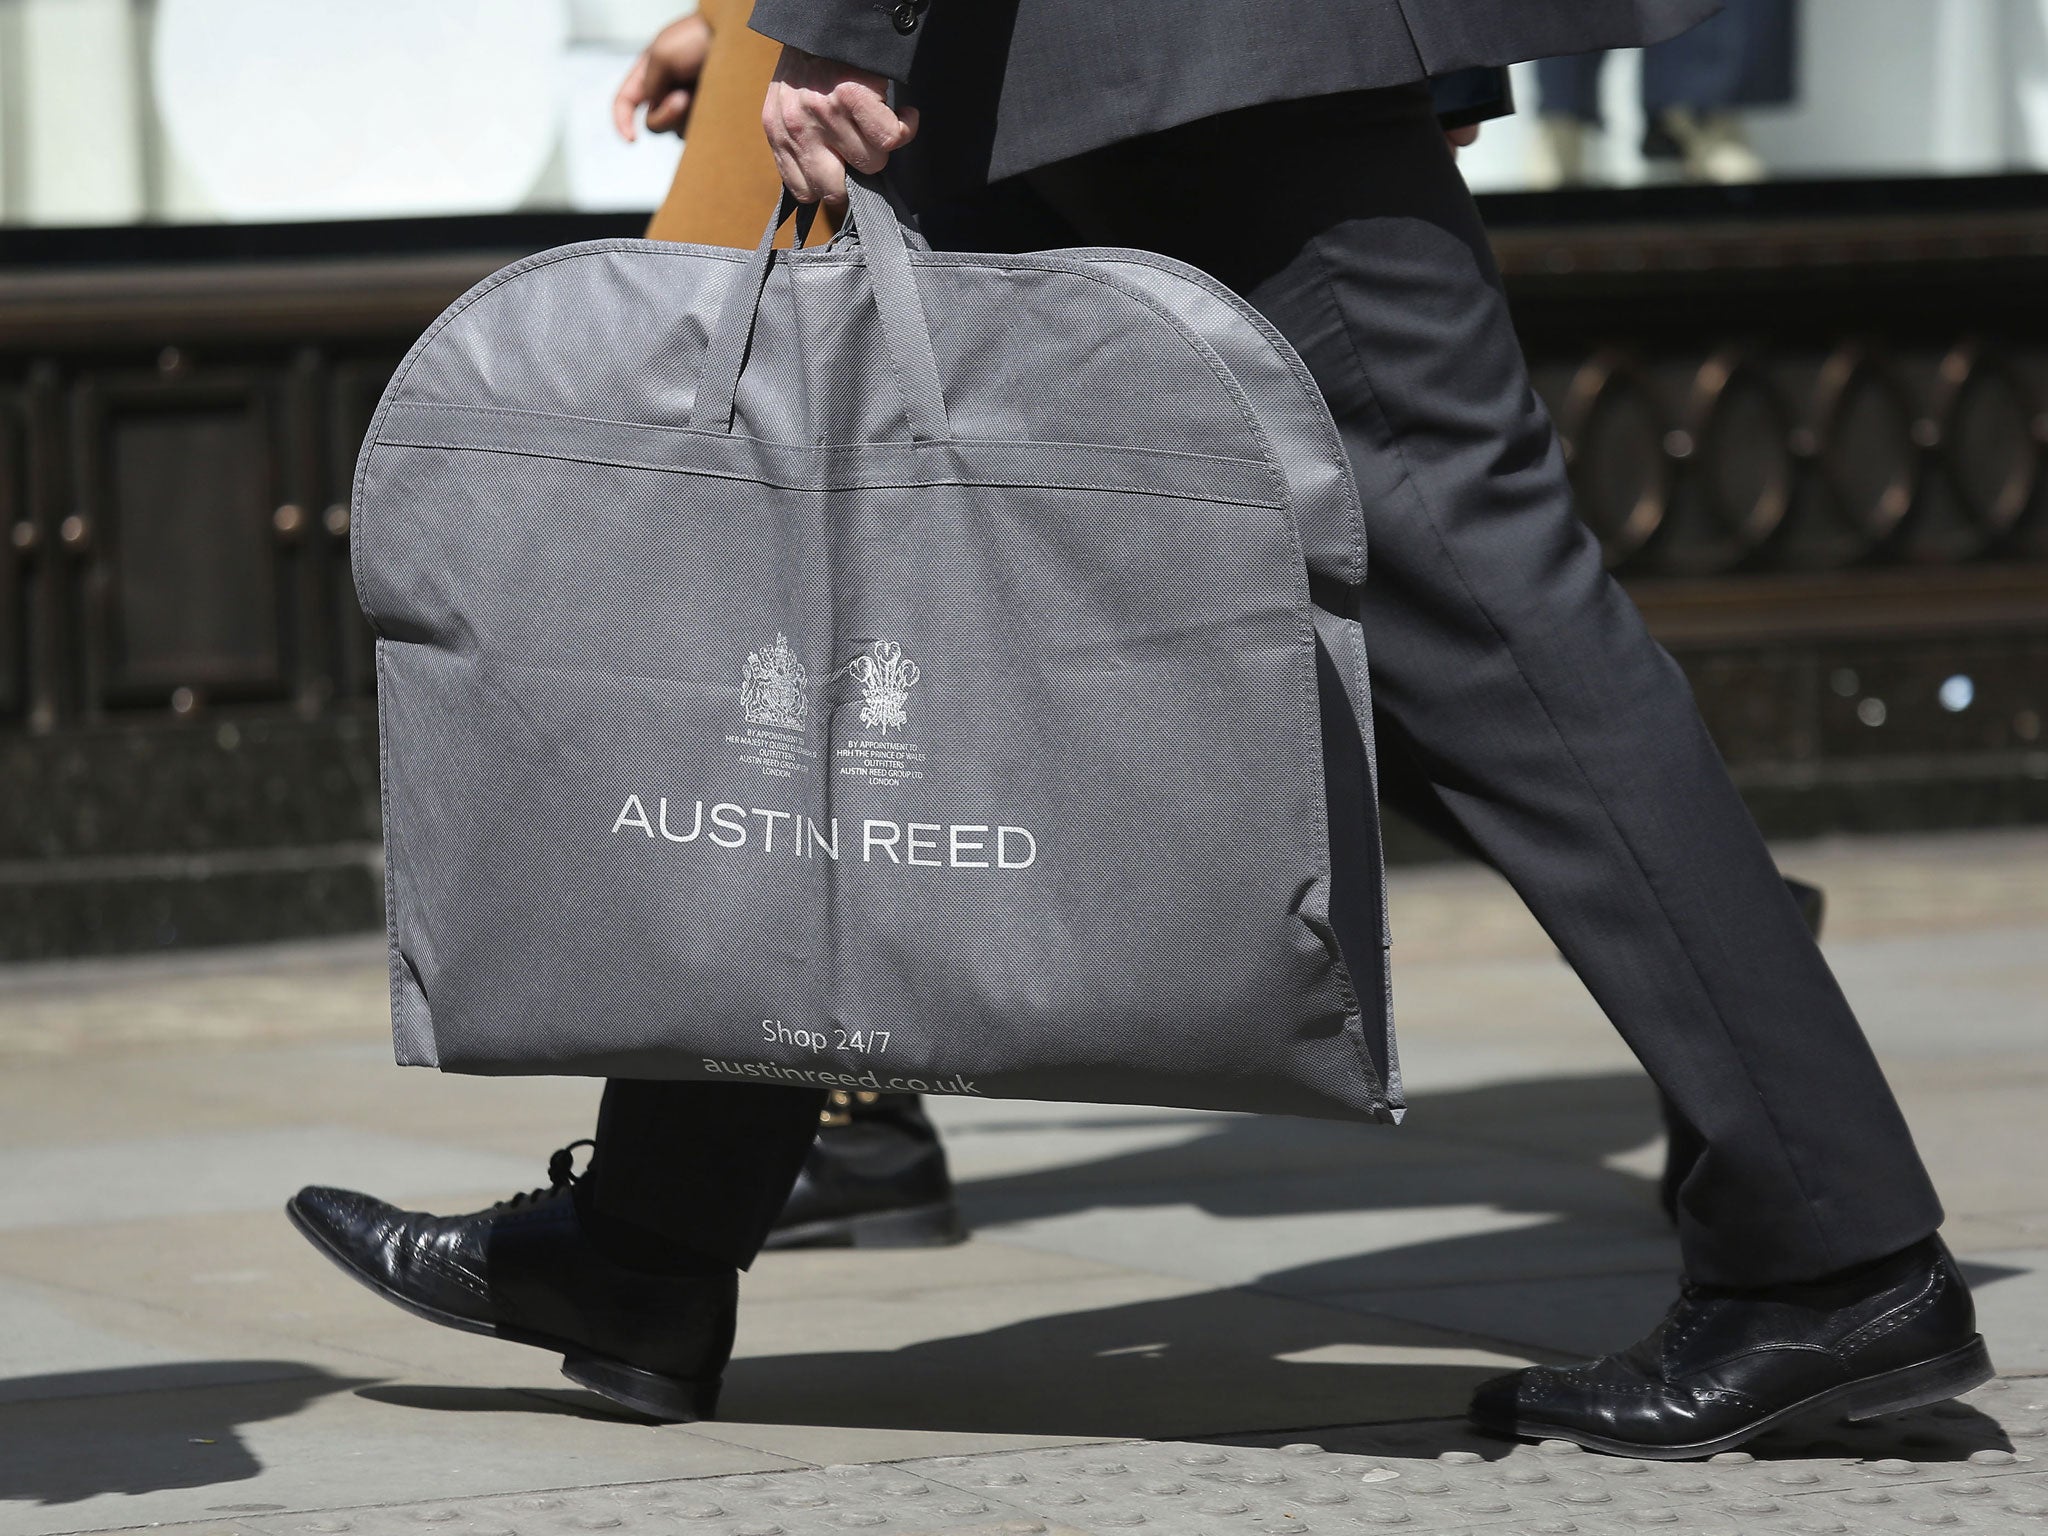 Business advisers have said Austin Reed's demise may be, in part, due to its inability to adapt to recent shopping trends.